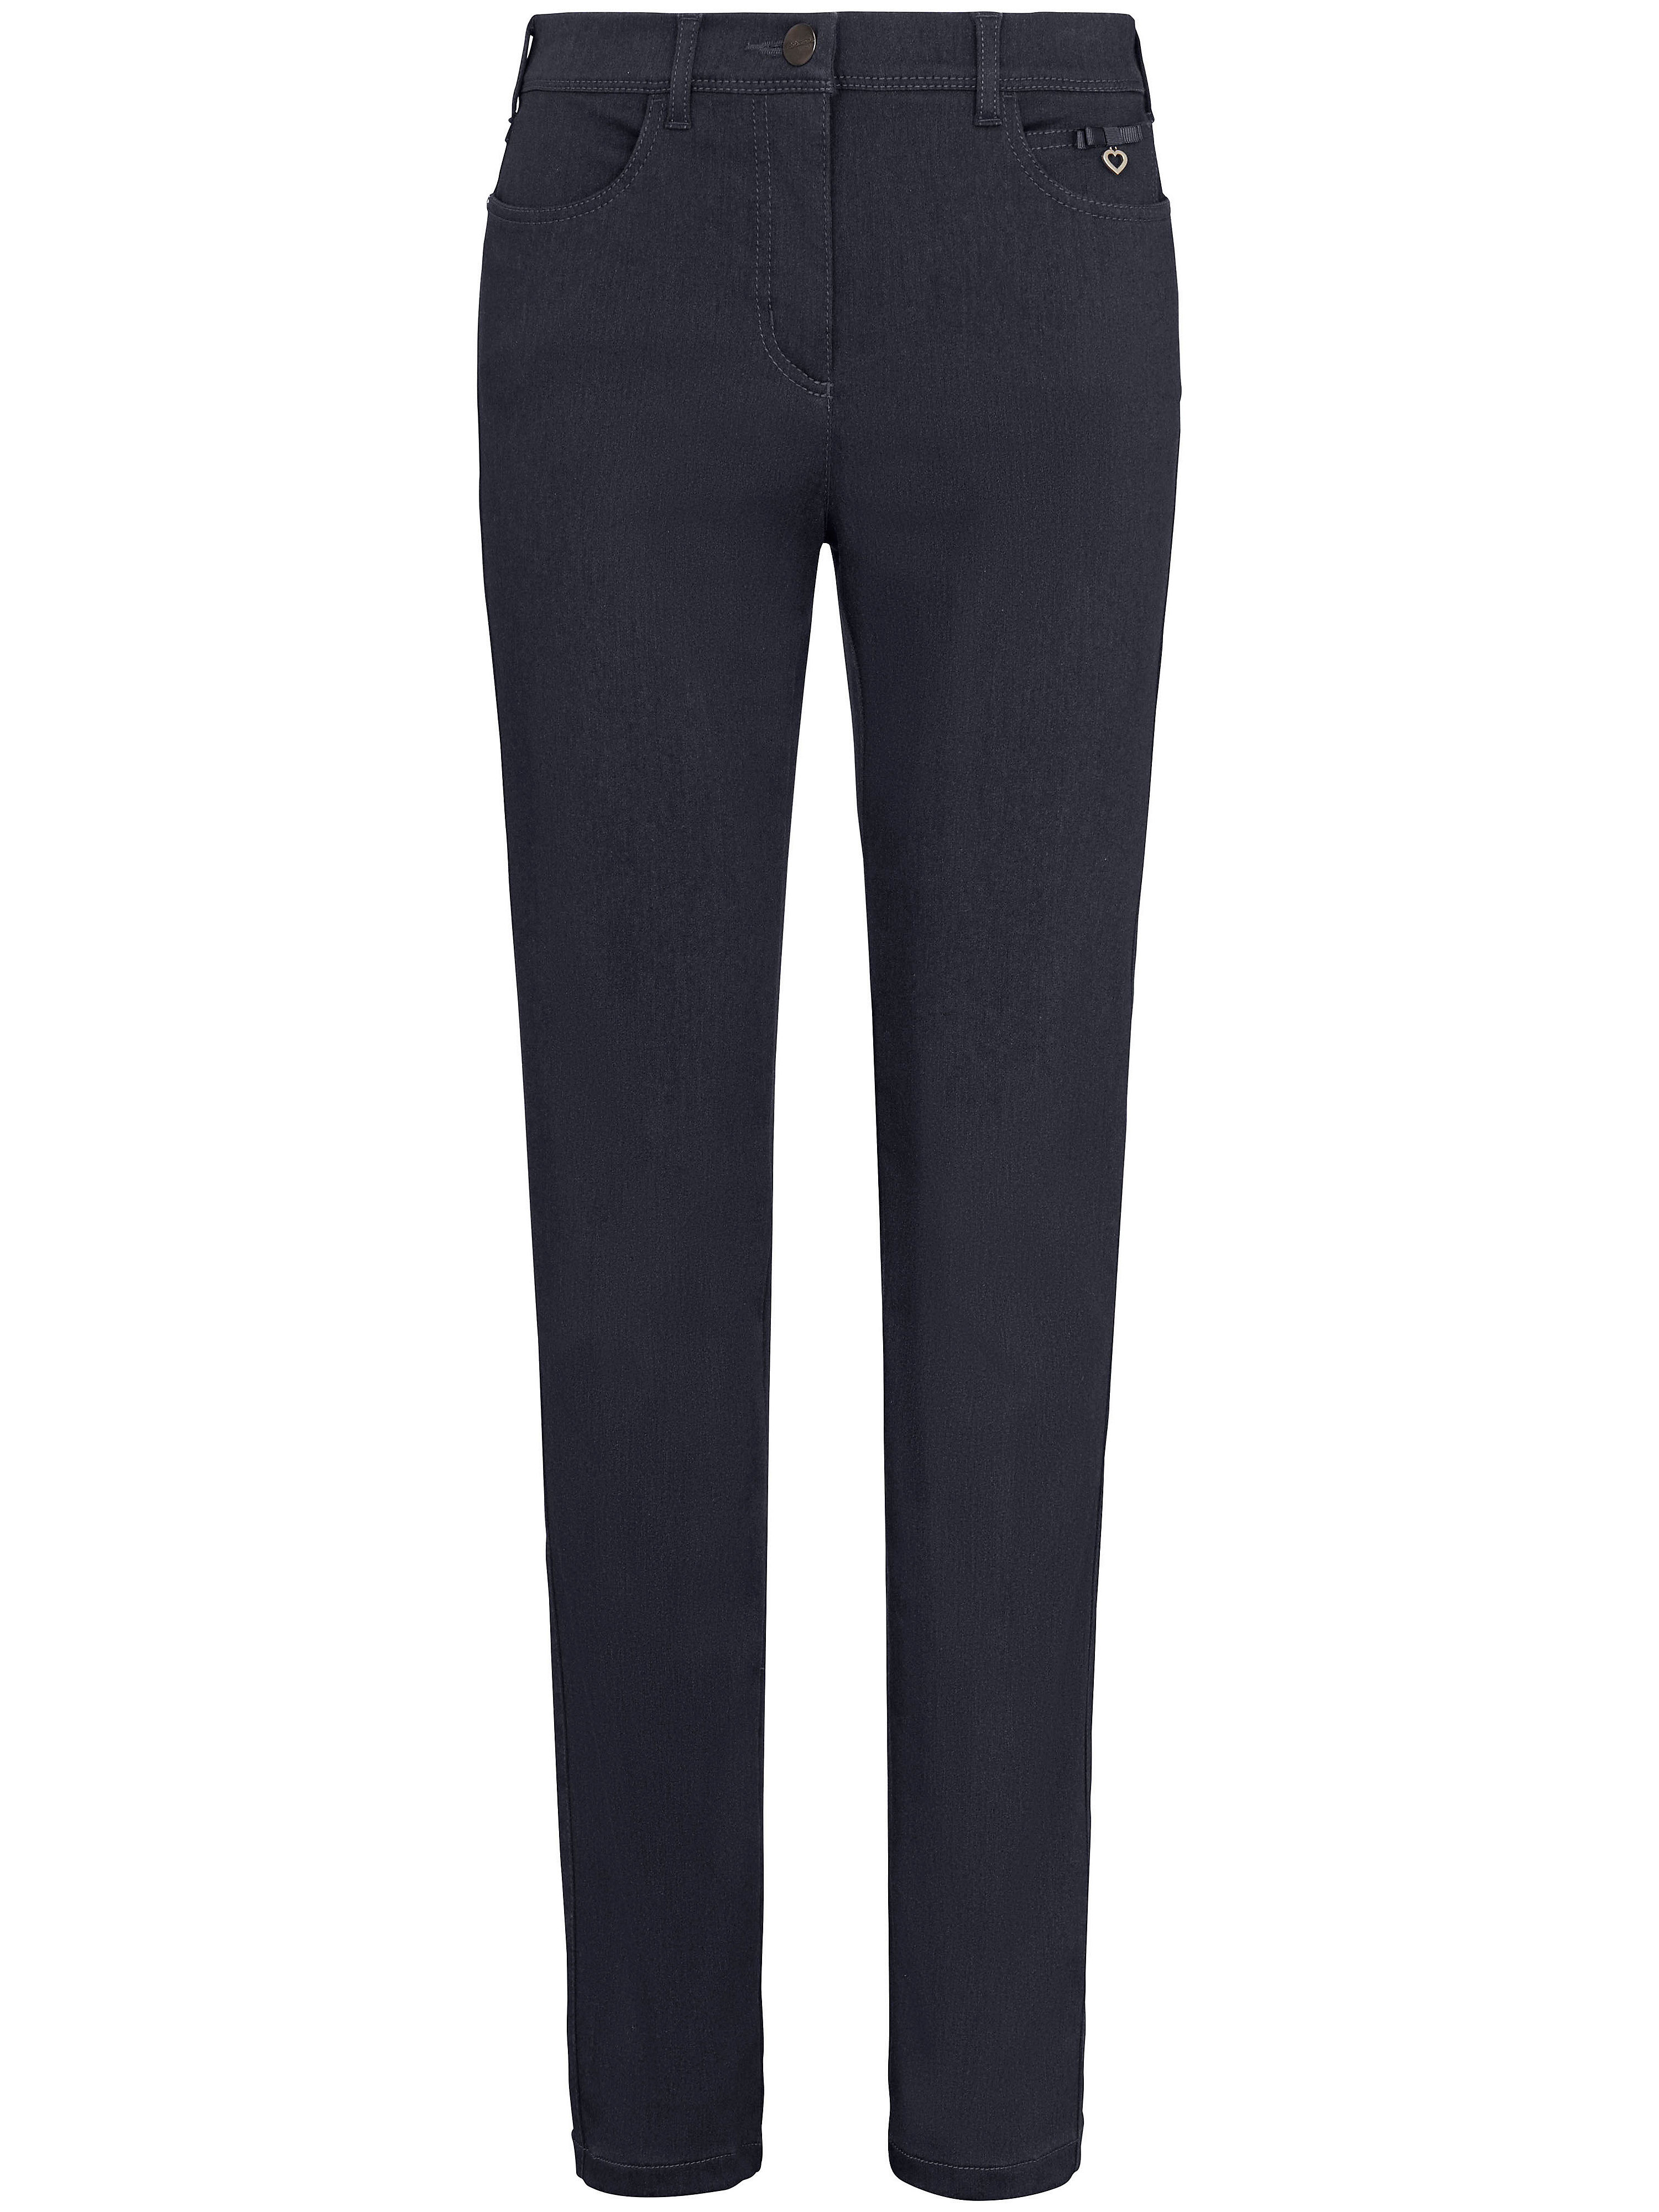 Relaxed by Toni - Trousers - navy